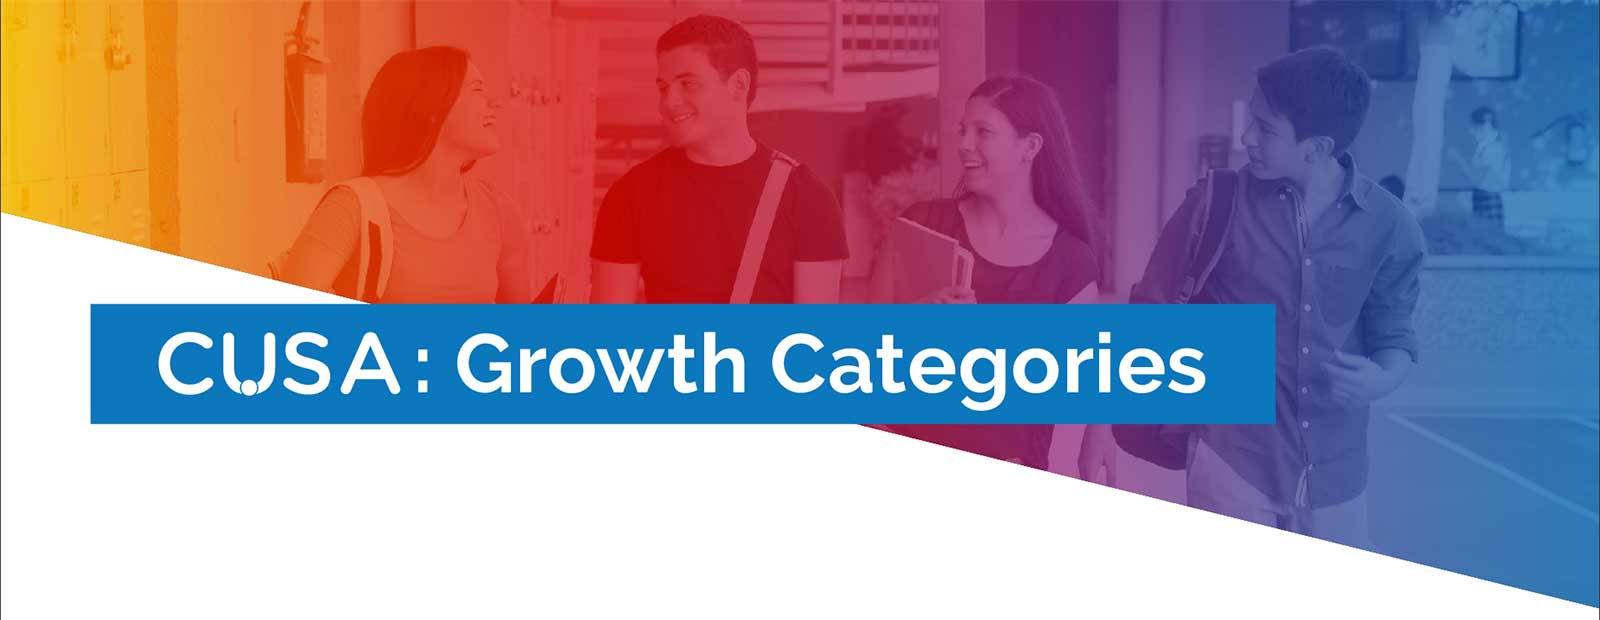 cusa growth categories